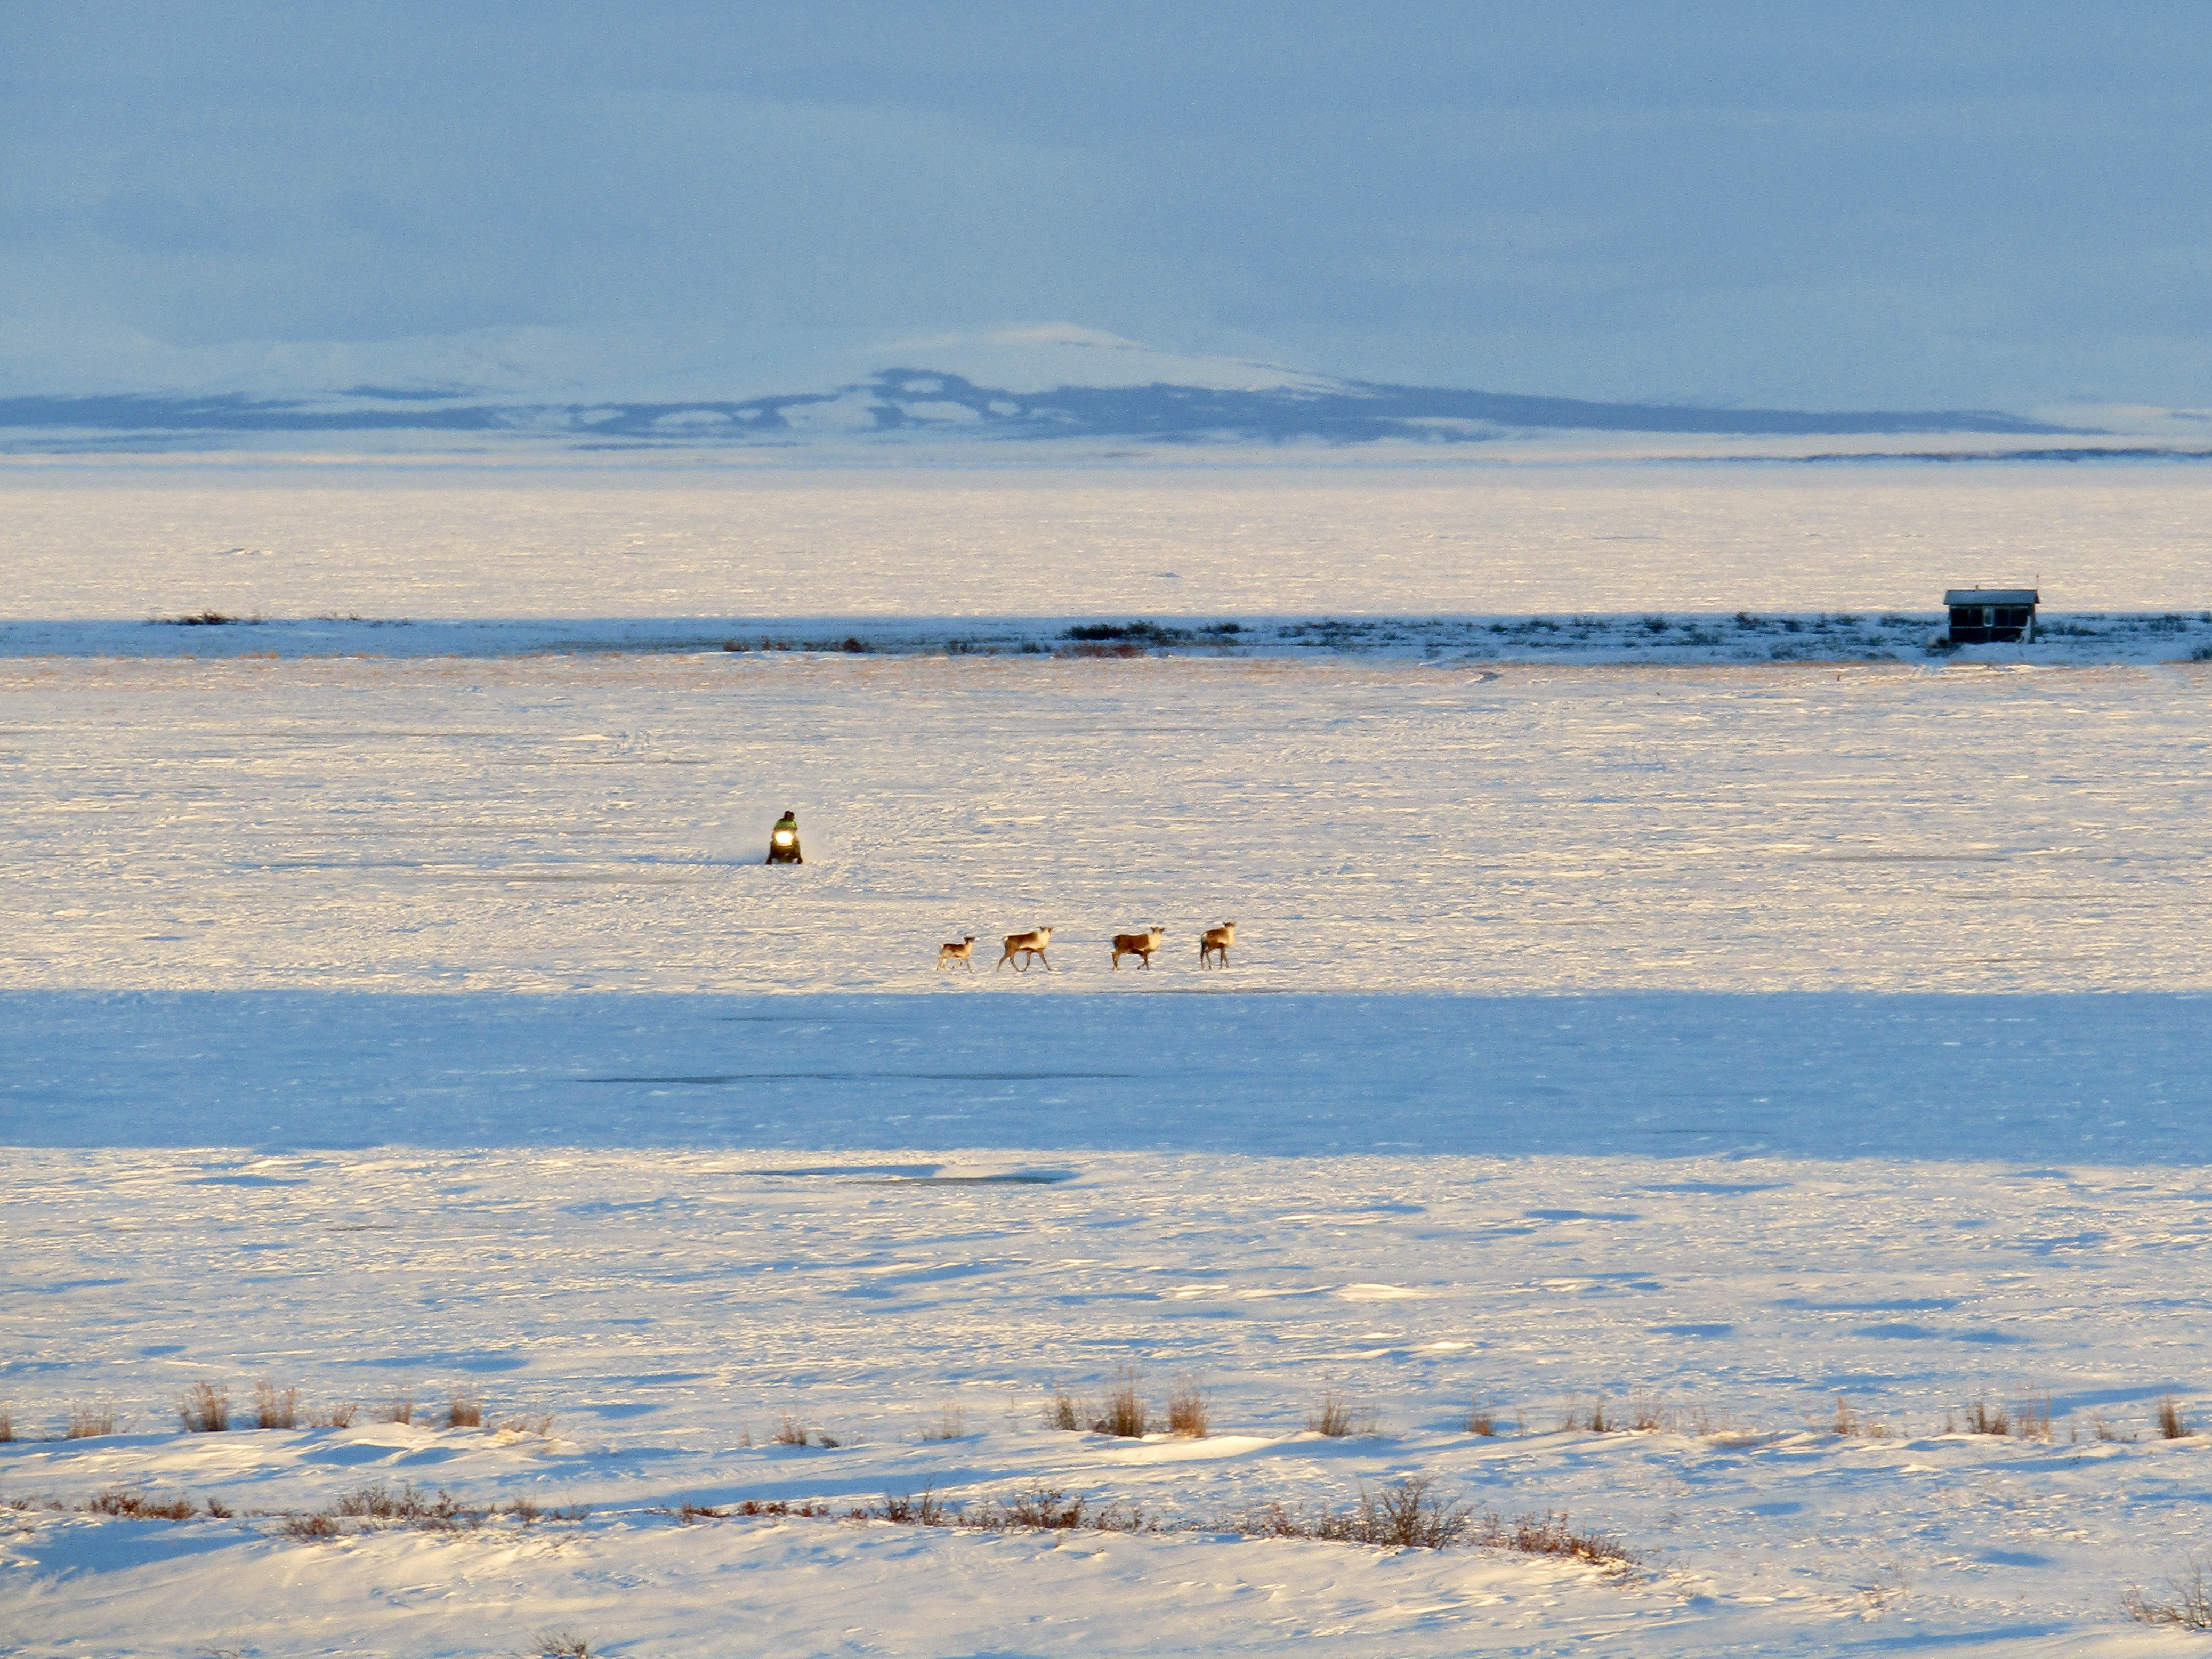 Carrbou and a snowmachine move in different directions across the tundra